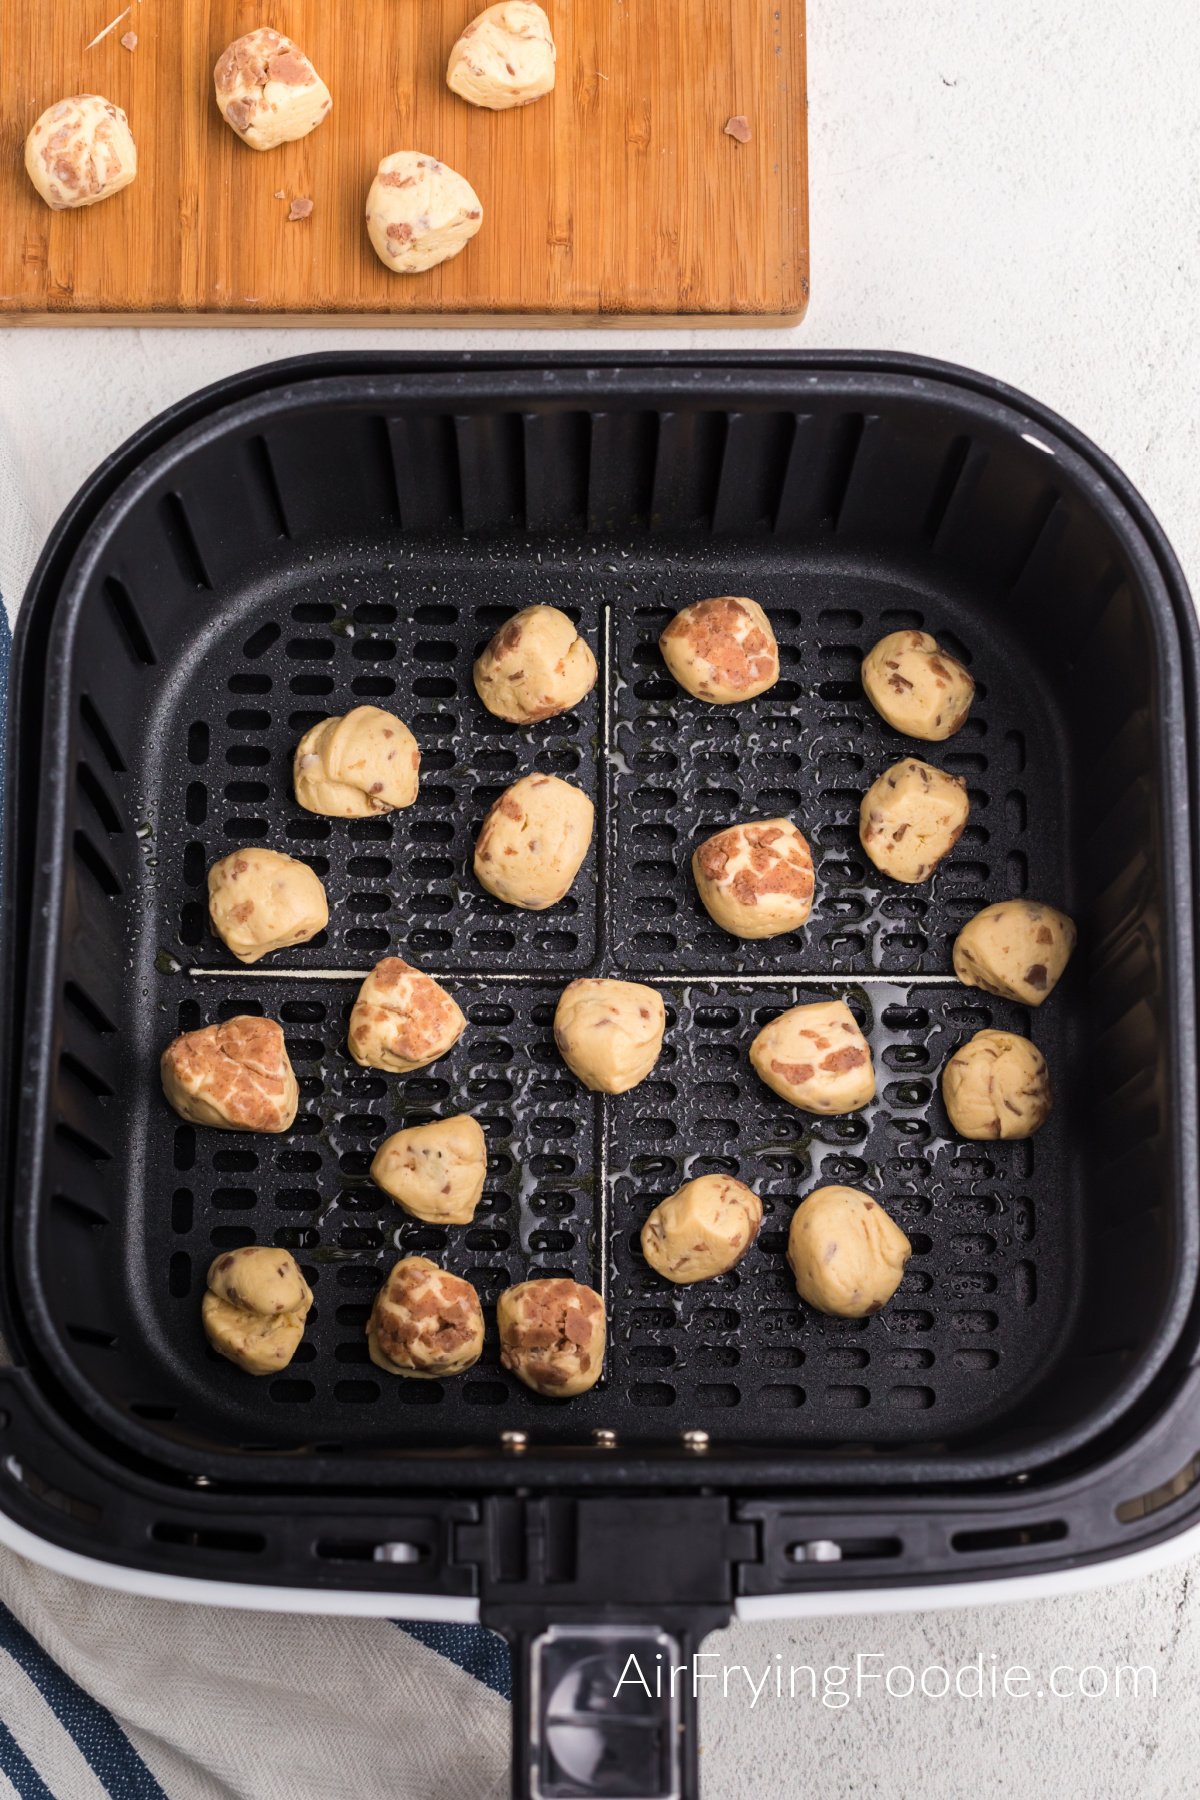 Cinnamon rolld dough balls in a single layer in the basket of the air fryer.